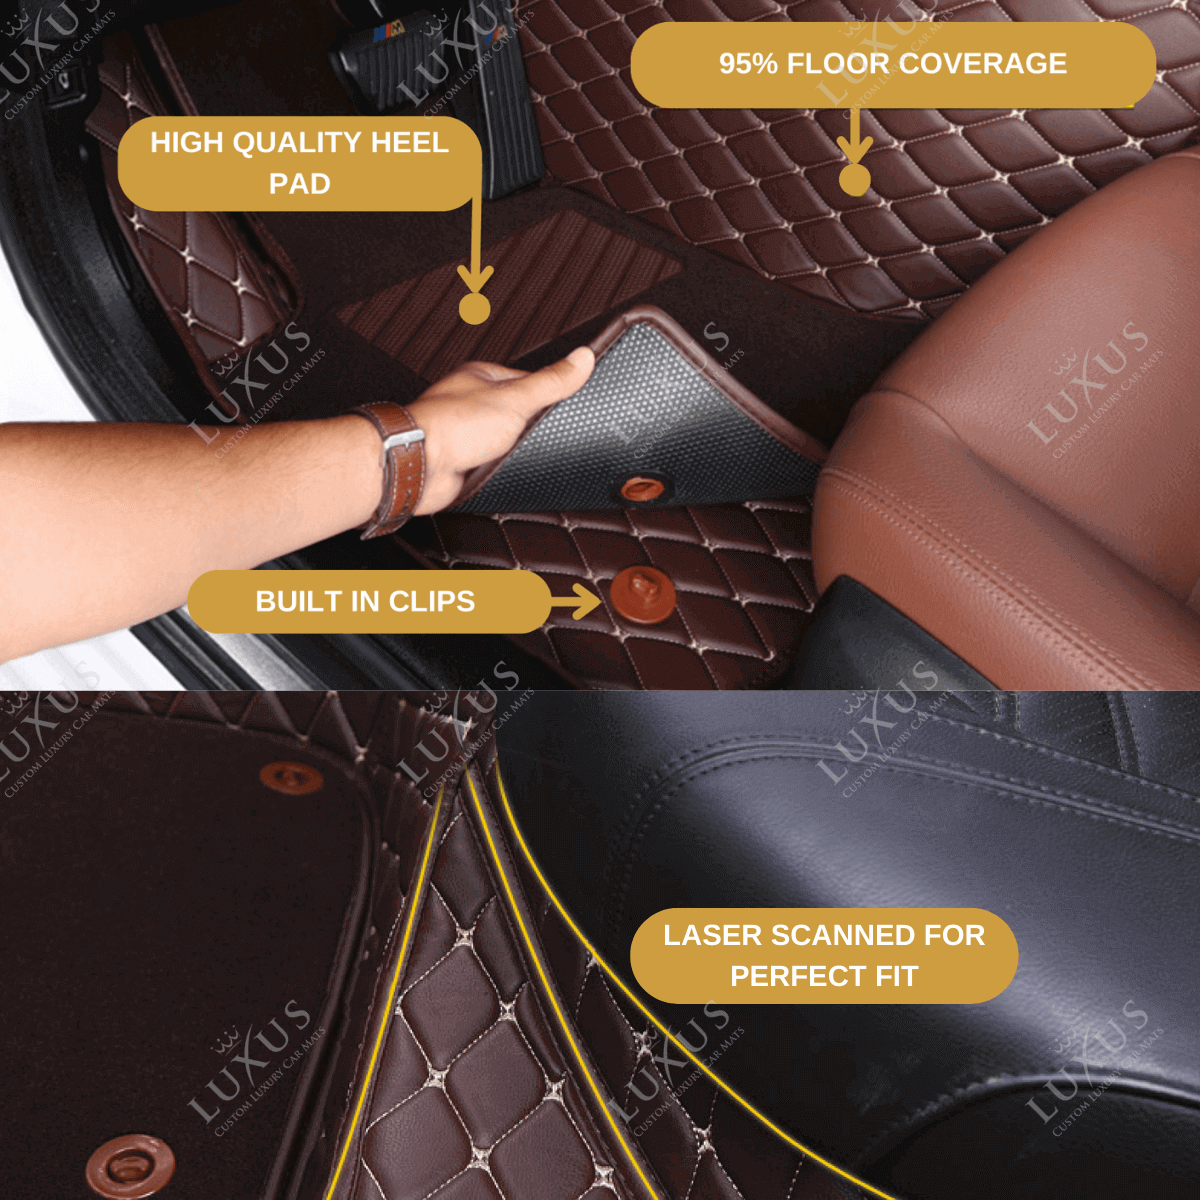 Black & Red Stitching Honeycomb Base & Beige Top Carpet Double Layer Luxury Car Mats Set